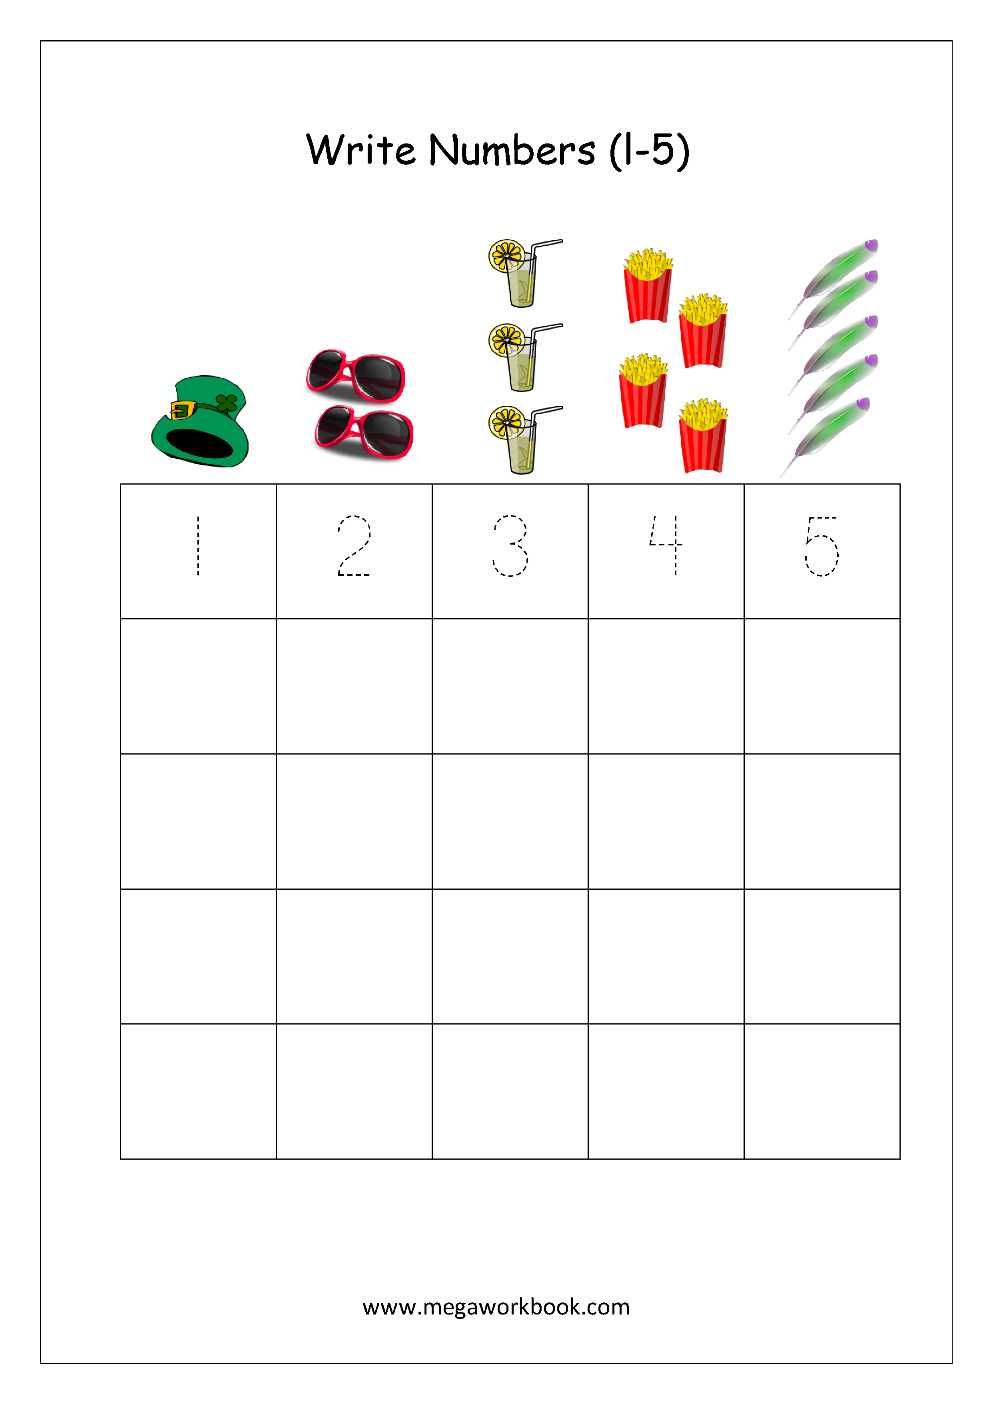 trace-the-numbers-1-to-5-numbers-worksheet-for-kids-jumpstart-number